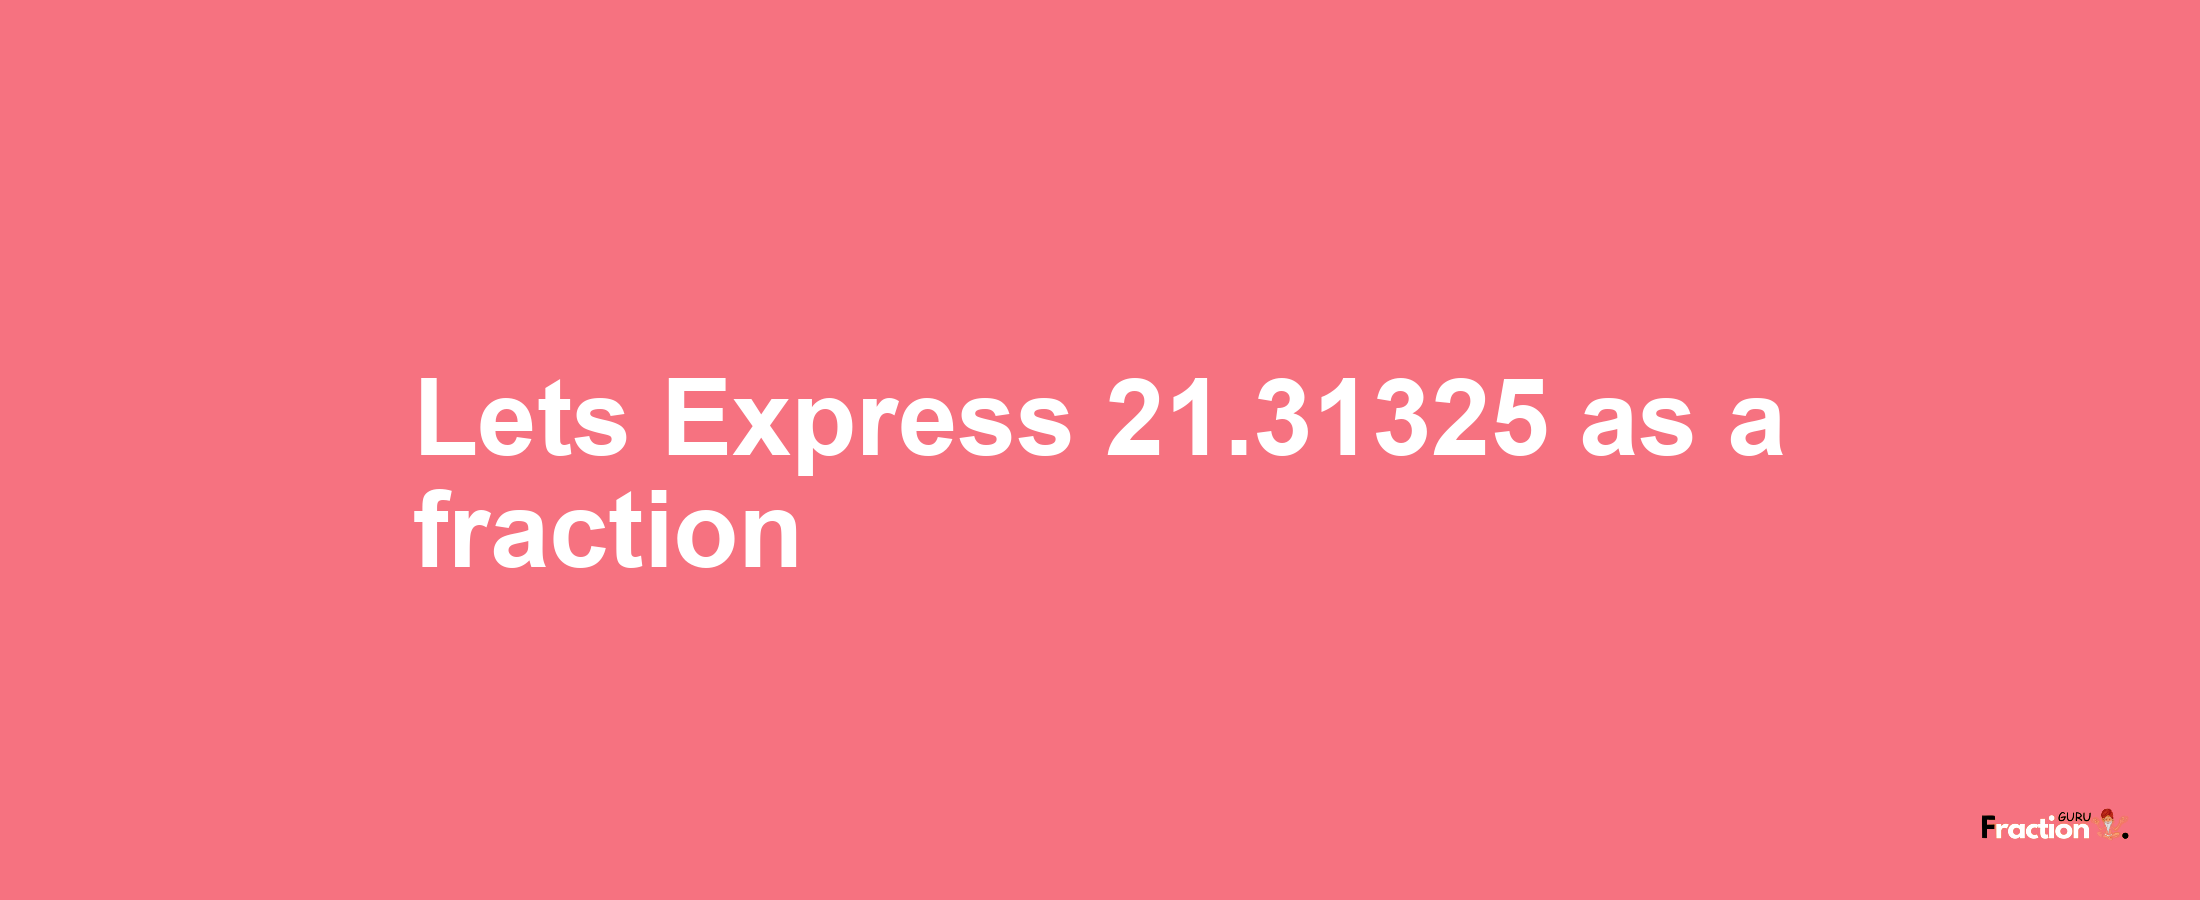 Lets Express 21.31325 as afraction